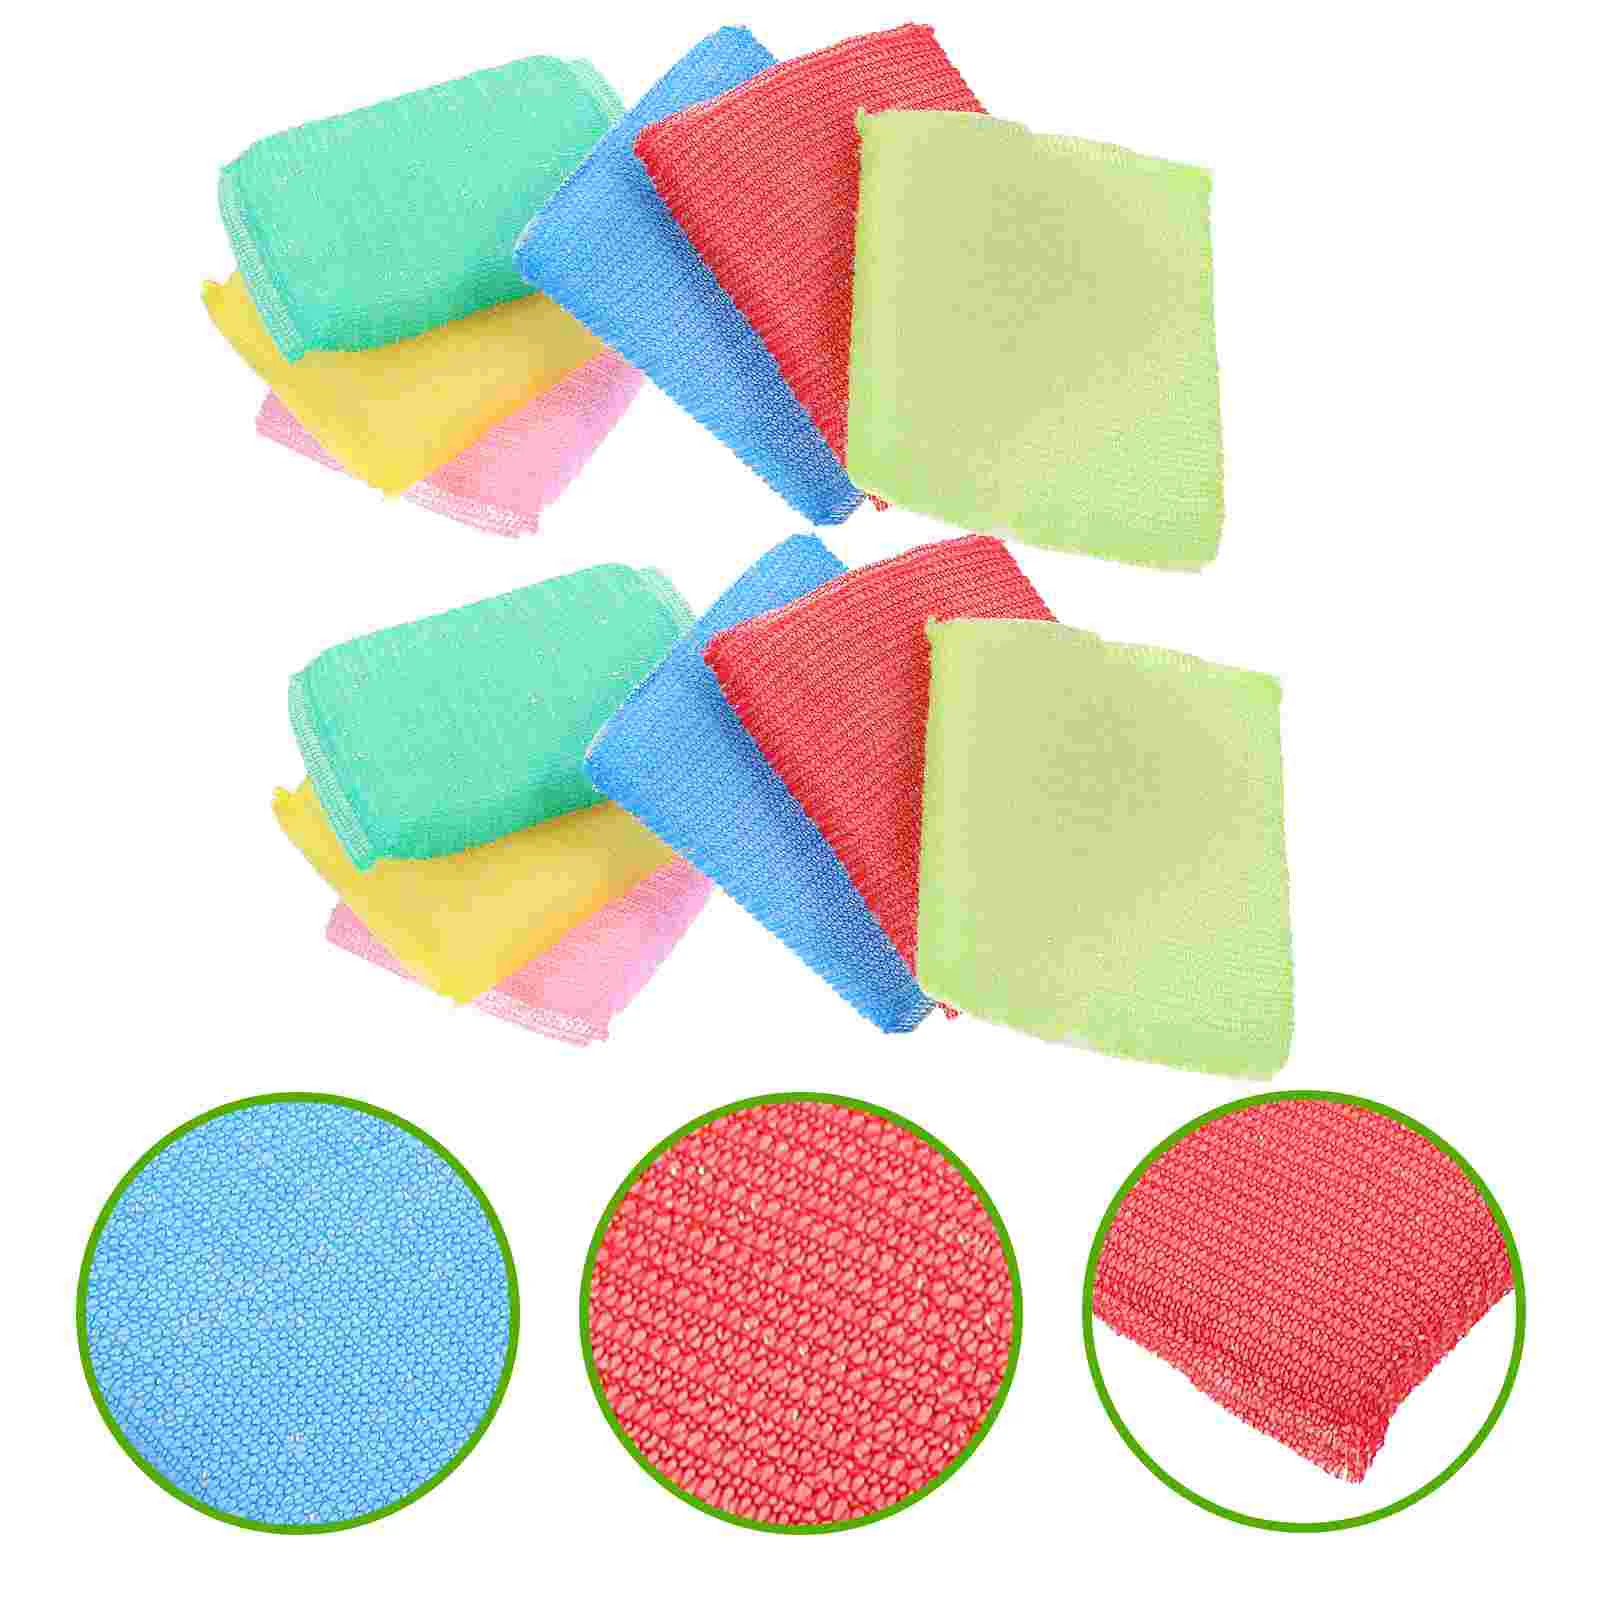 

12 Pcs Kitchen Dish Sponge Sink Cleaning Rag Scrub Scrubber Nylon Sponges Pads for Dishes